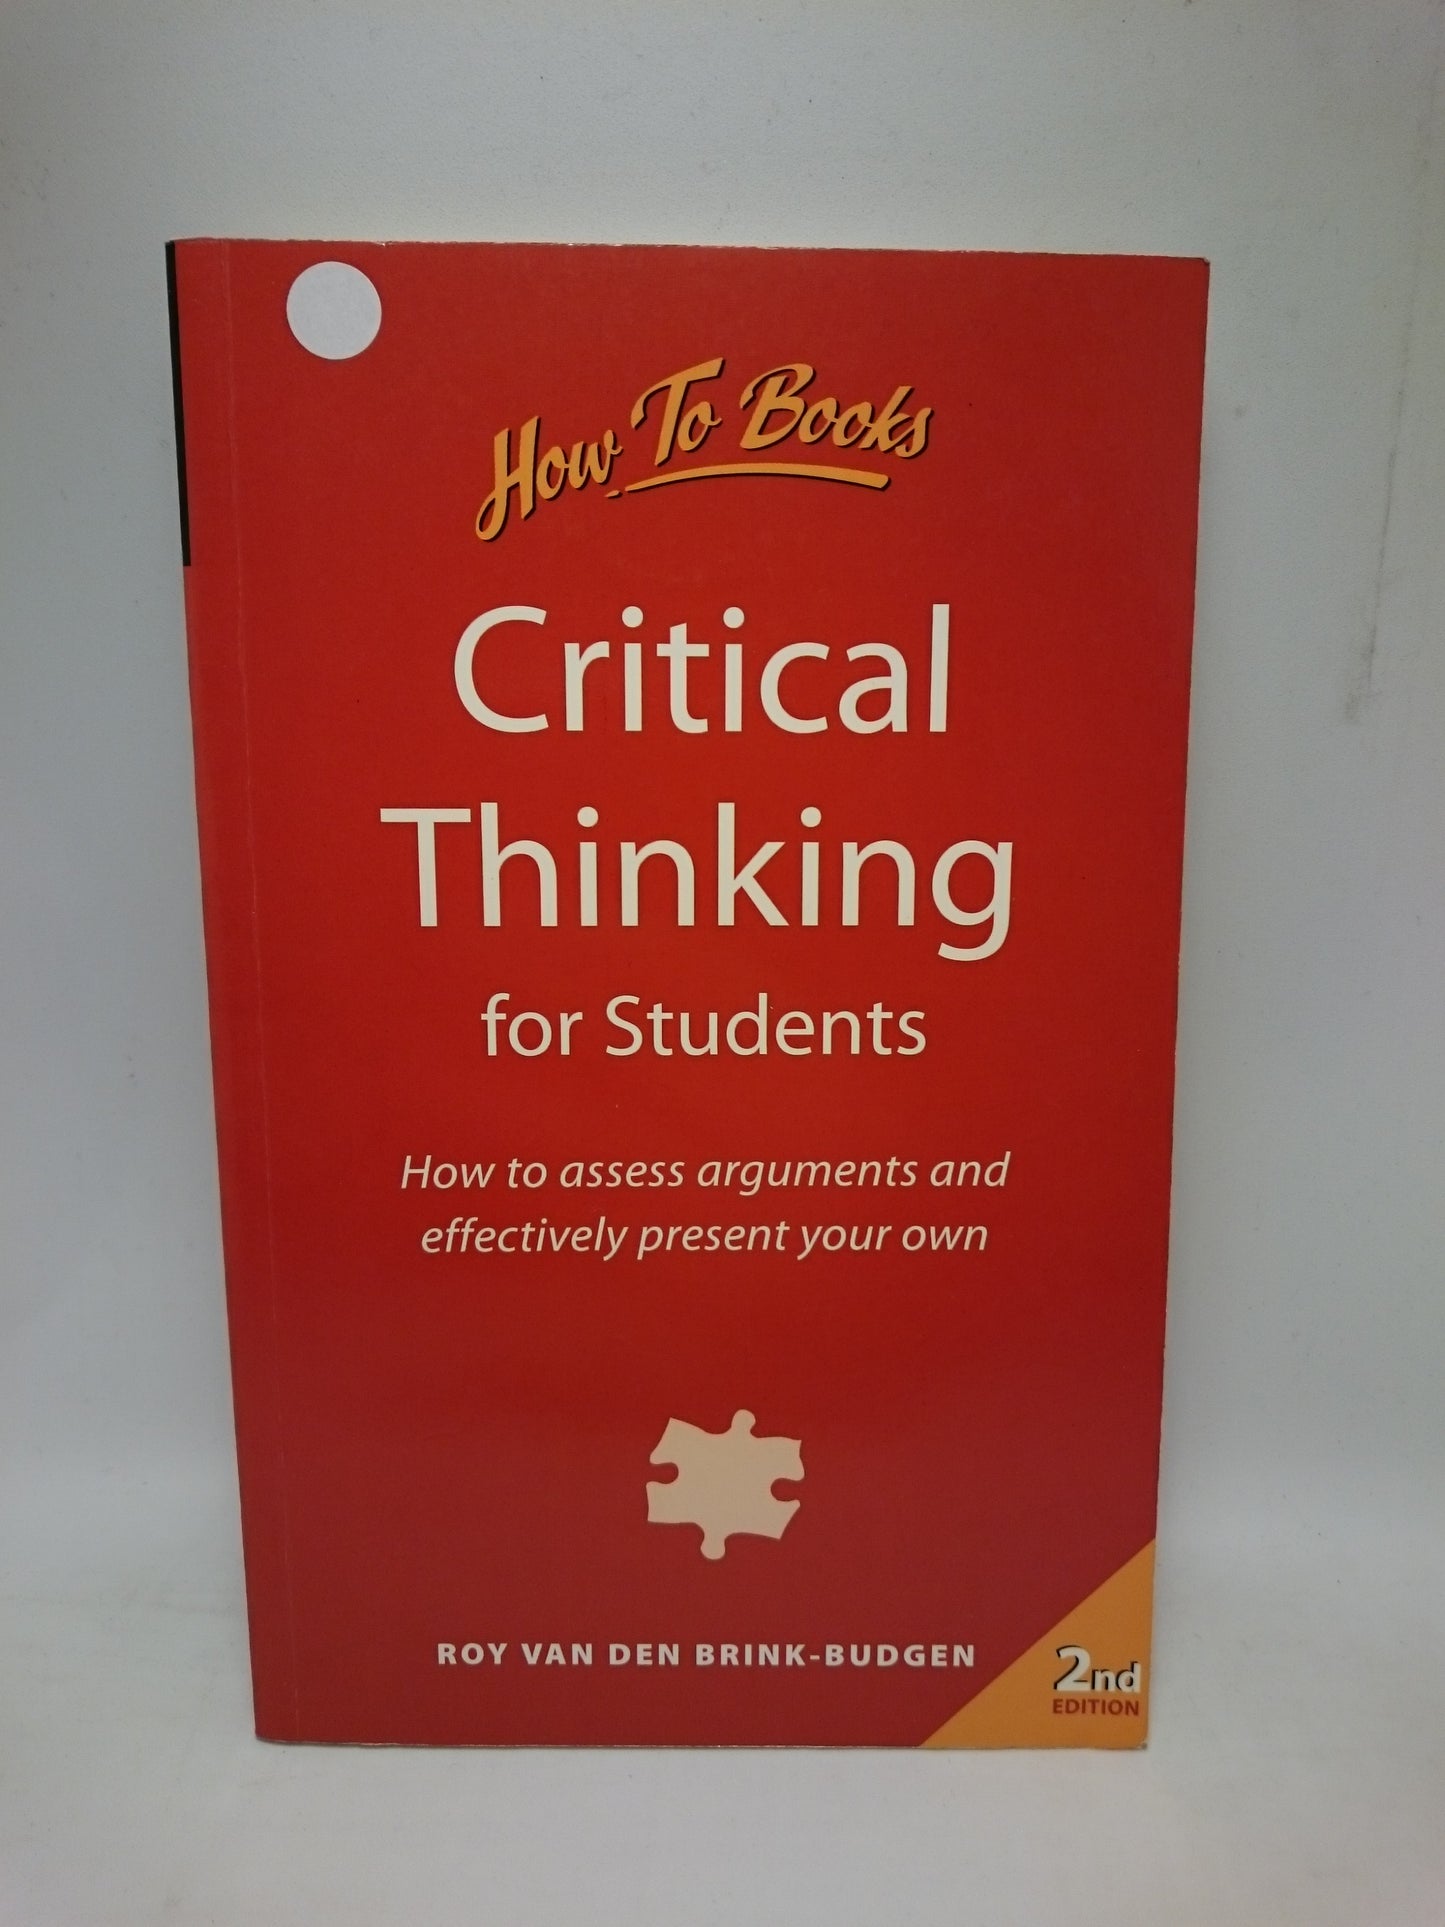 Critical Thinking for Students